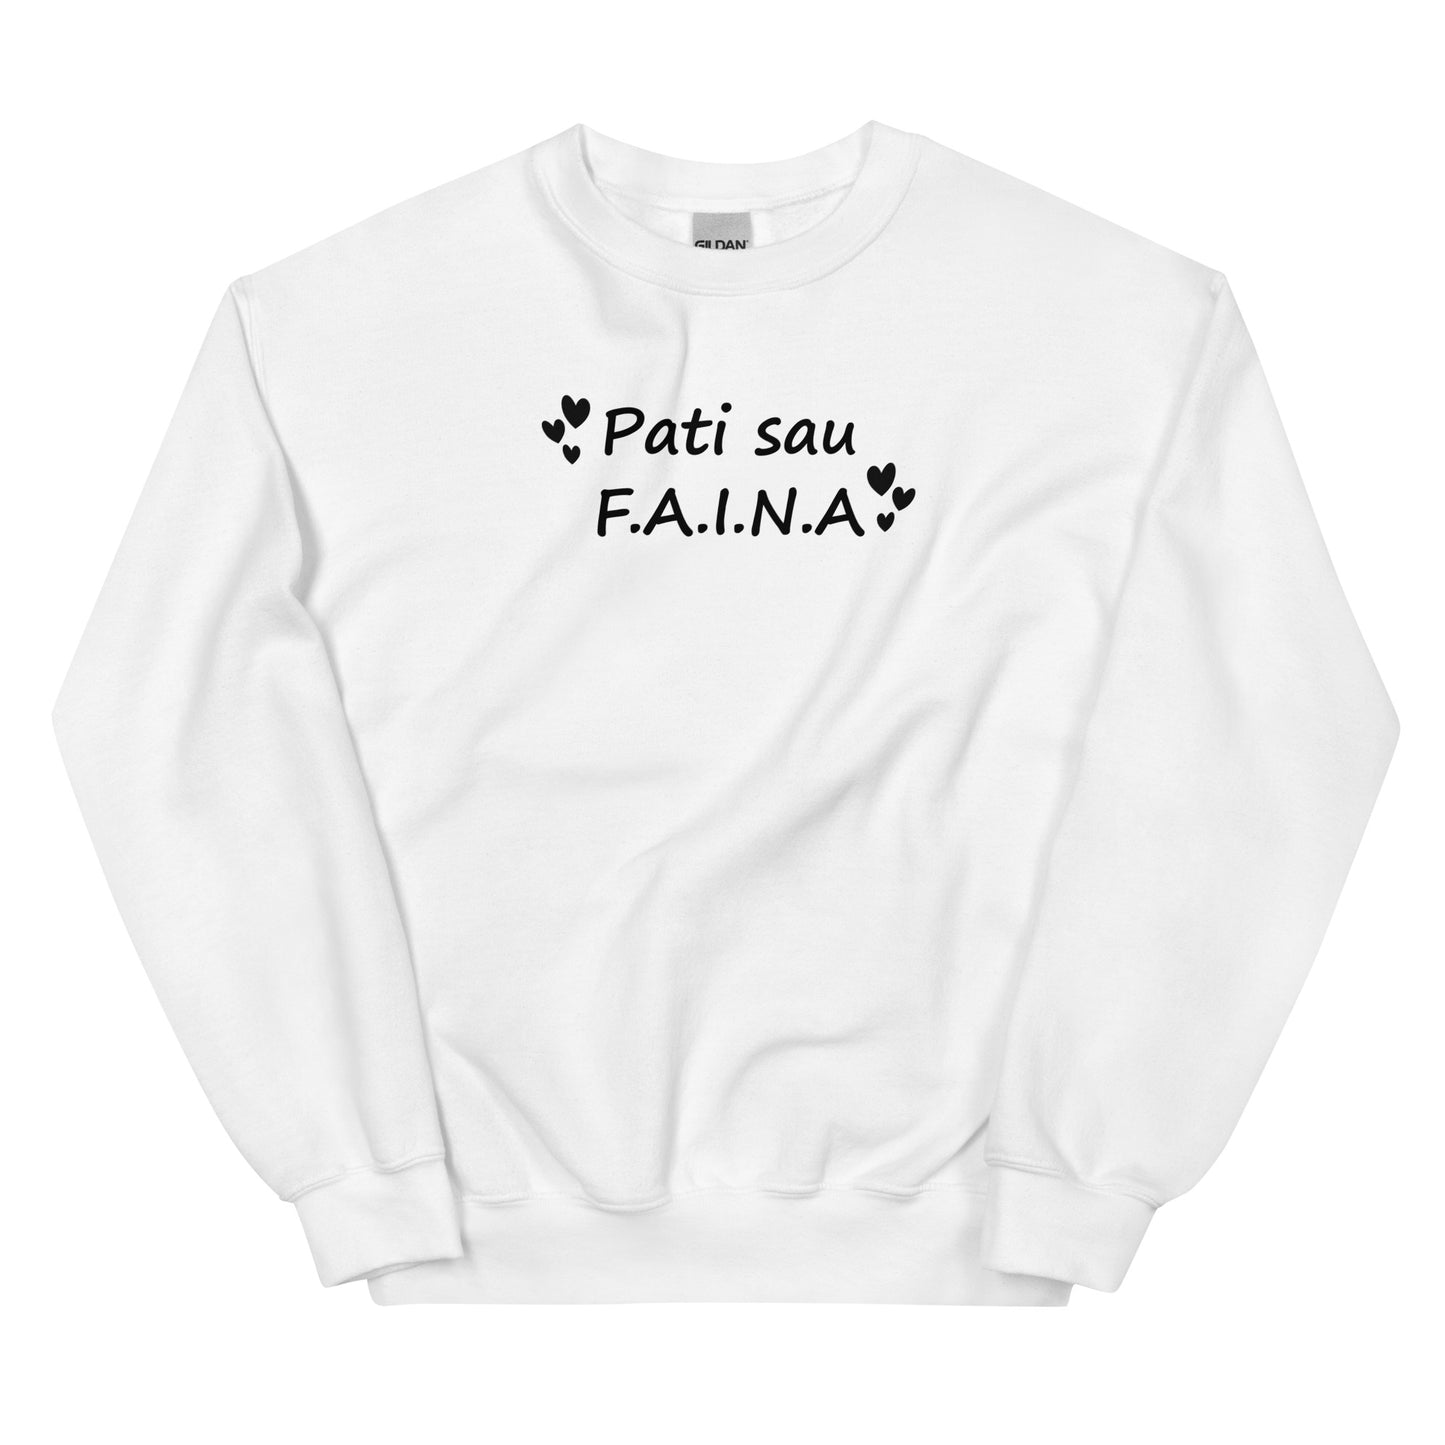 Unisex sweater: "Fine for yourself"